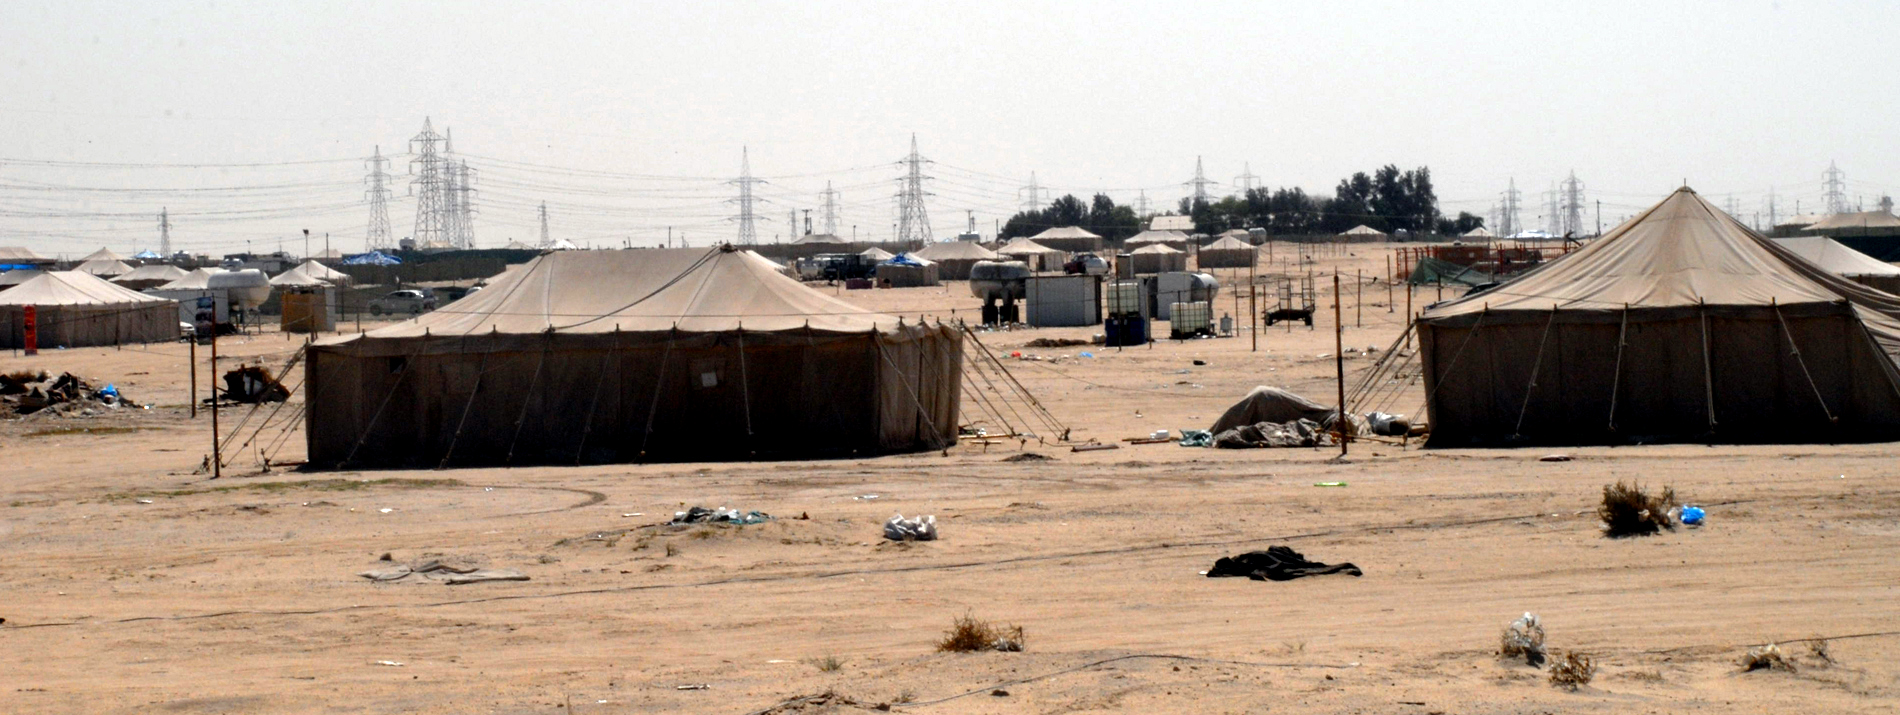 Kuwait's camping season "the annual stress reliever"